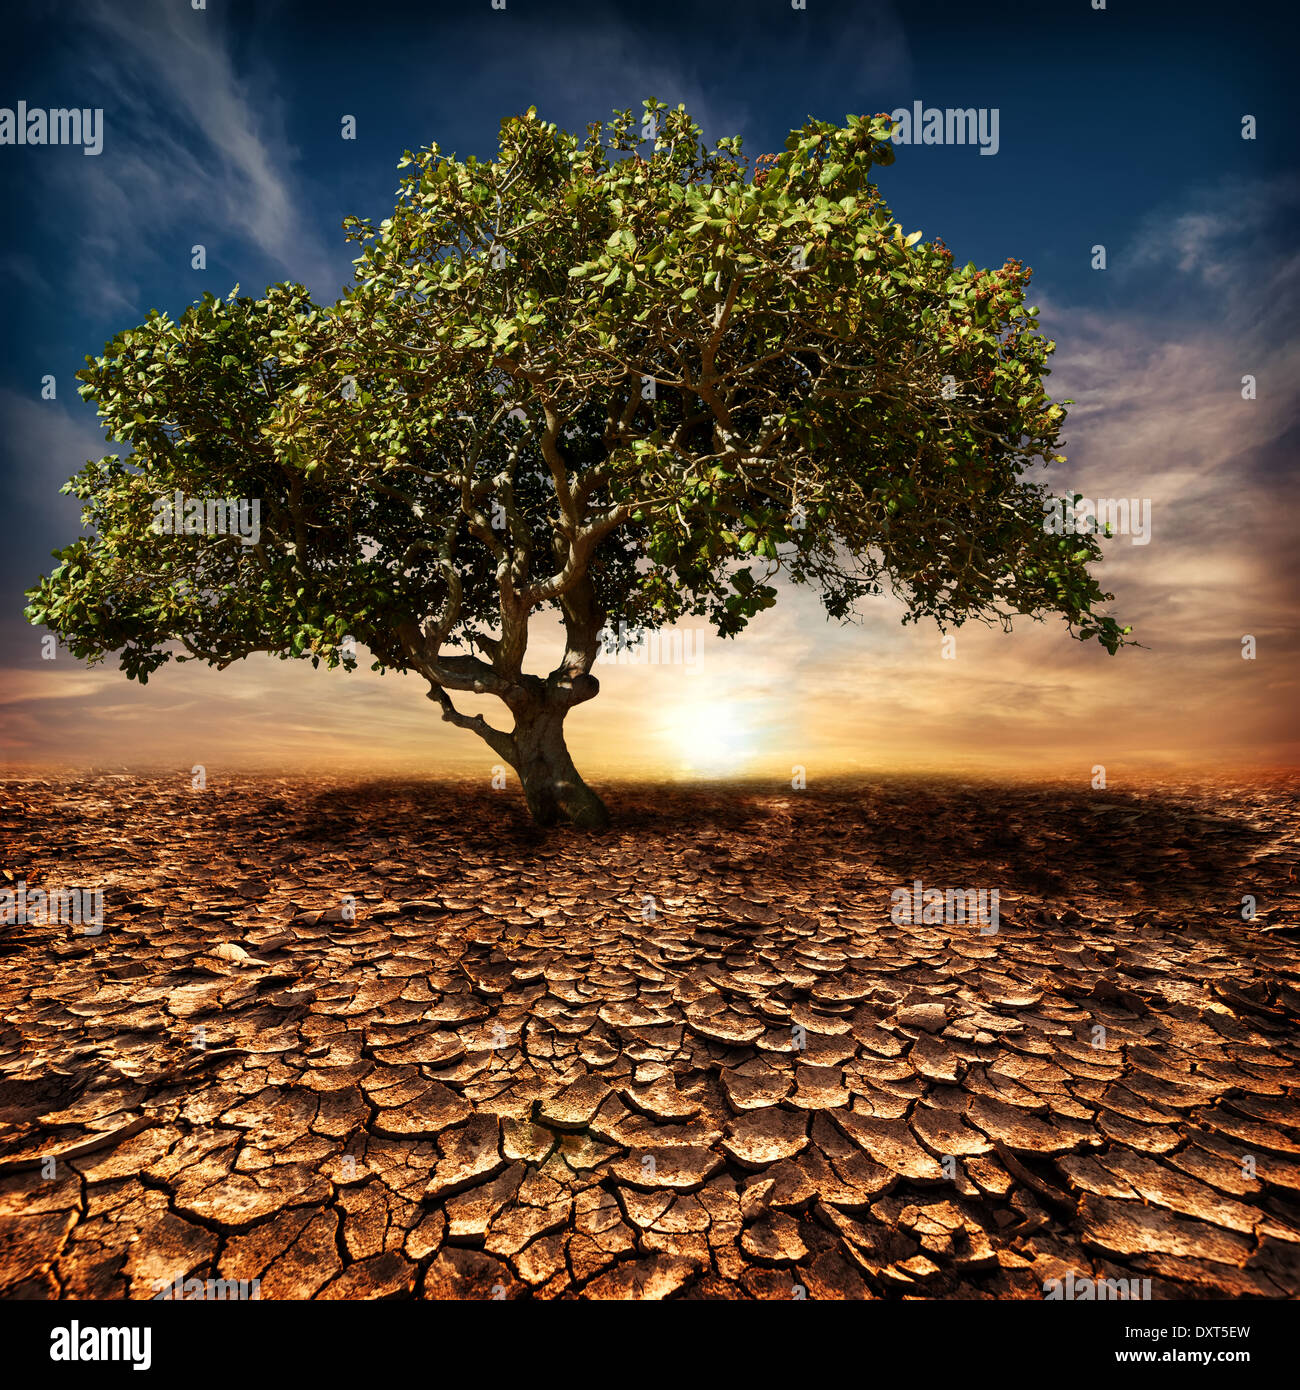 Global warming concept. Lonely green tree under dramatic evening sunset sky at drought cracked desert landscape Stock Photo